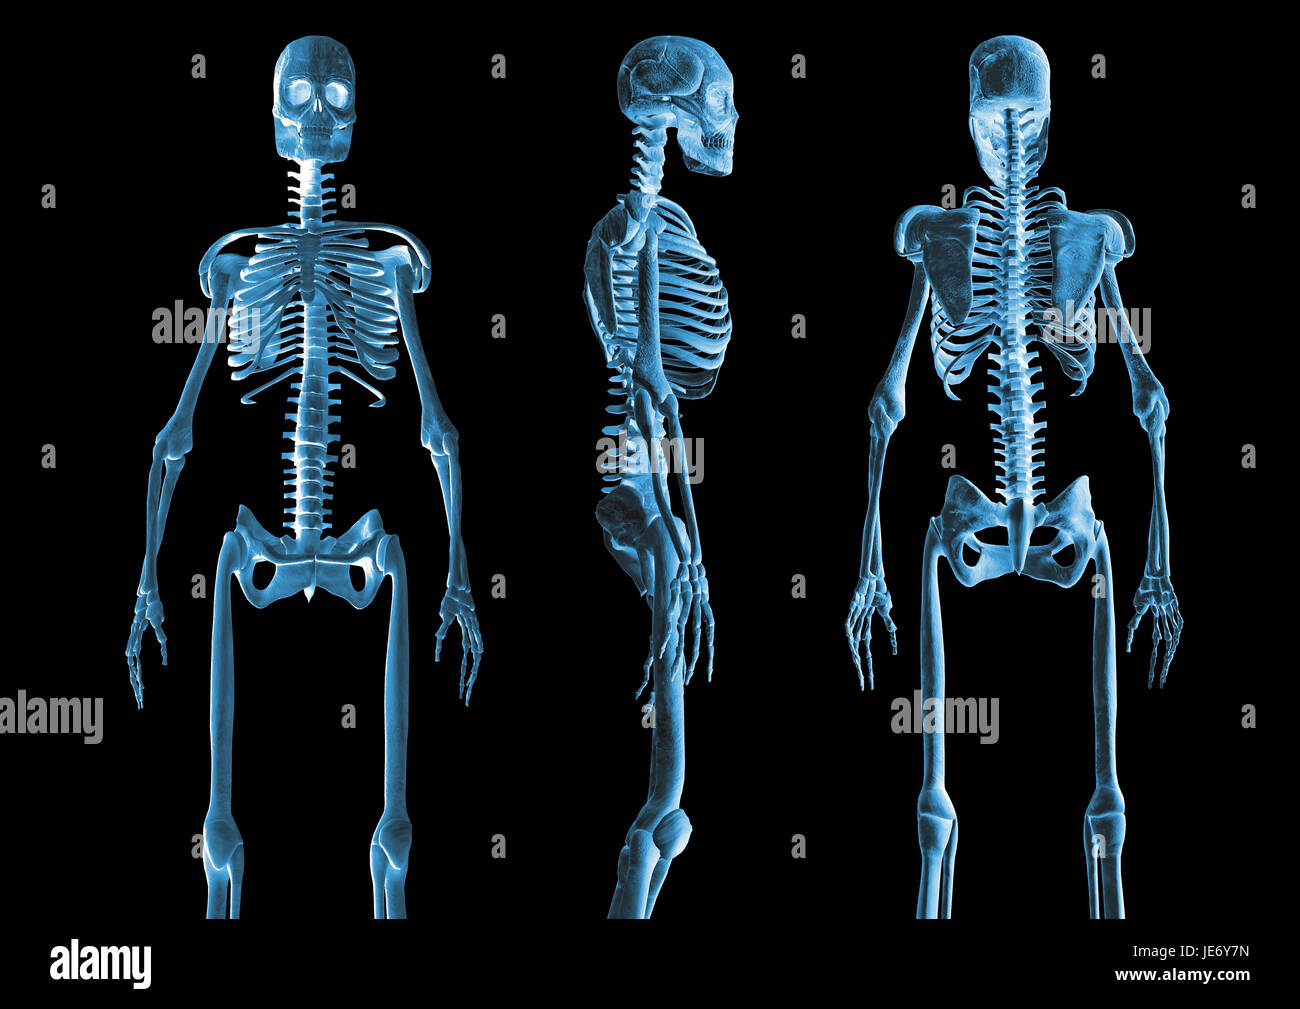 Skeletons, different views, Stock Photo